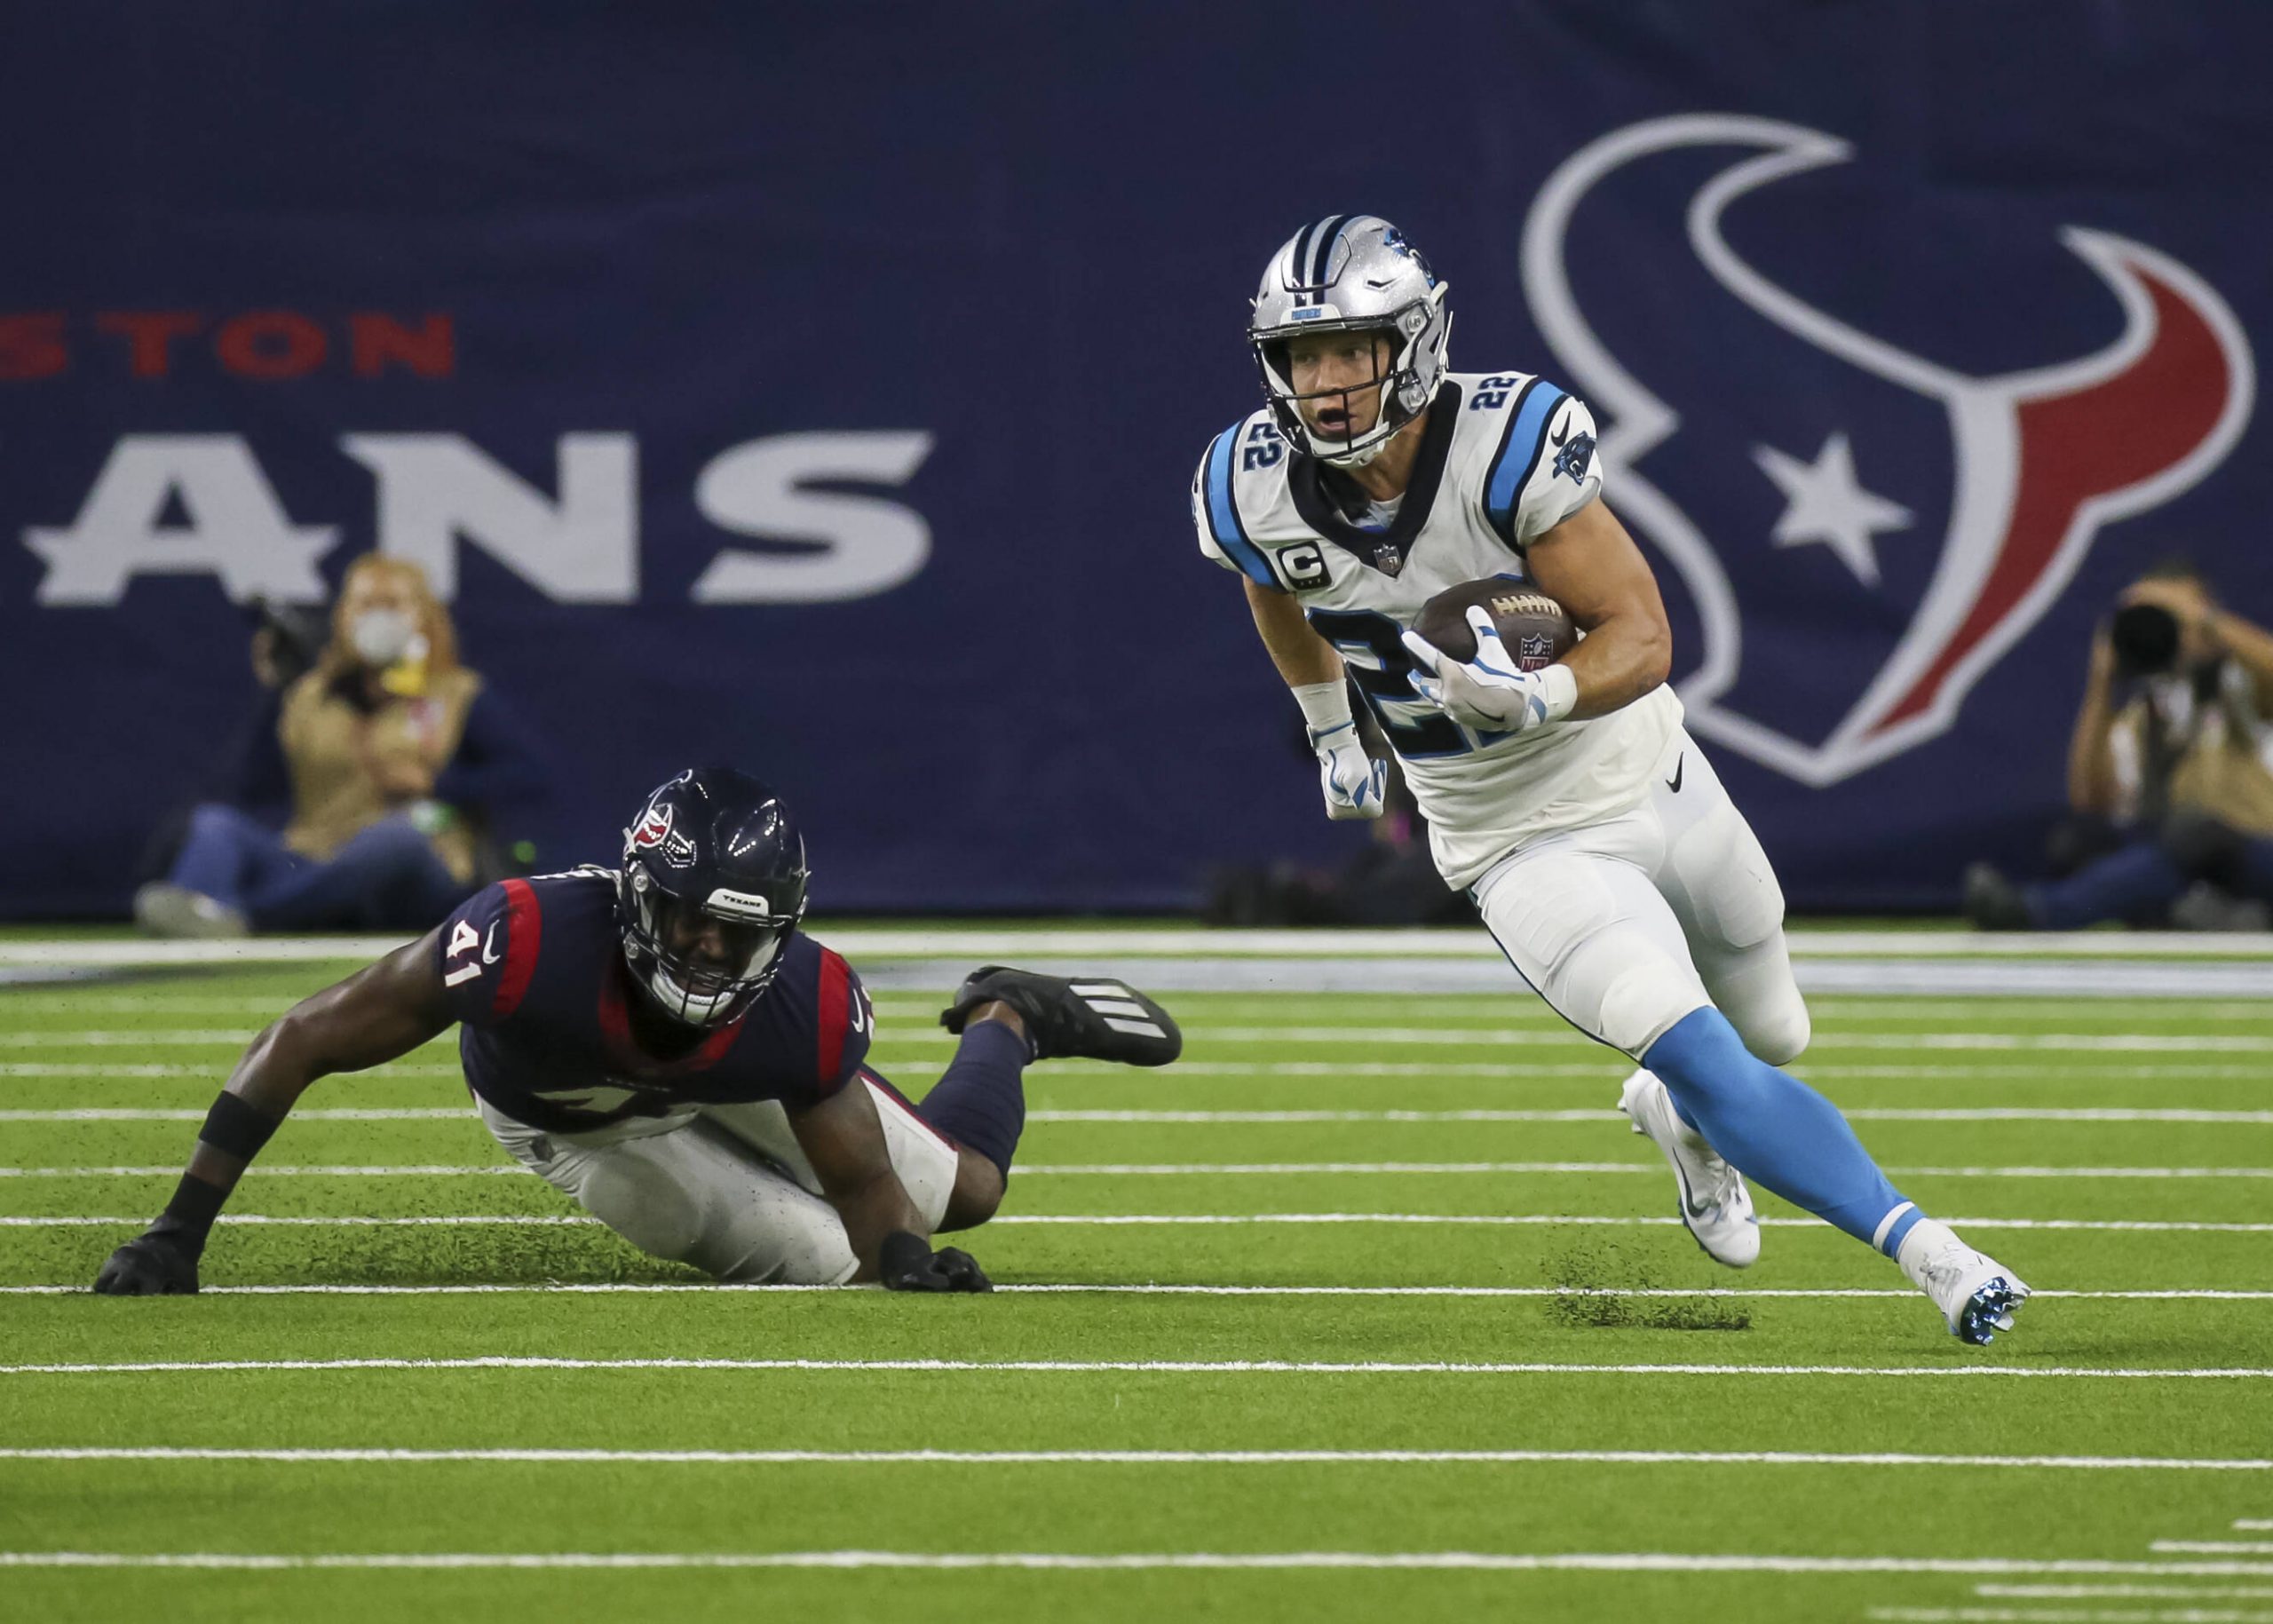 HOUSTON, TX - SEPTEMBER 23: Carolina Panthers running back Christian McCaffrey (22) evades a tackle by Houston Texans in